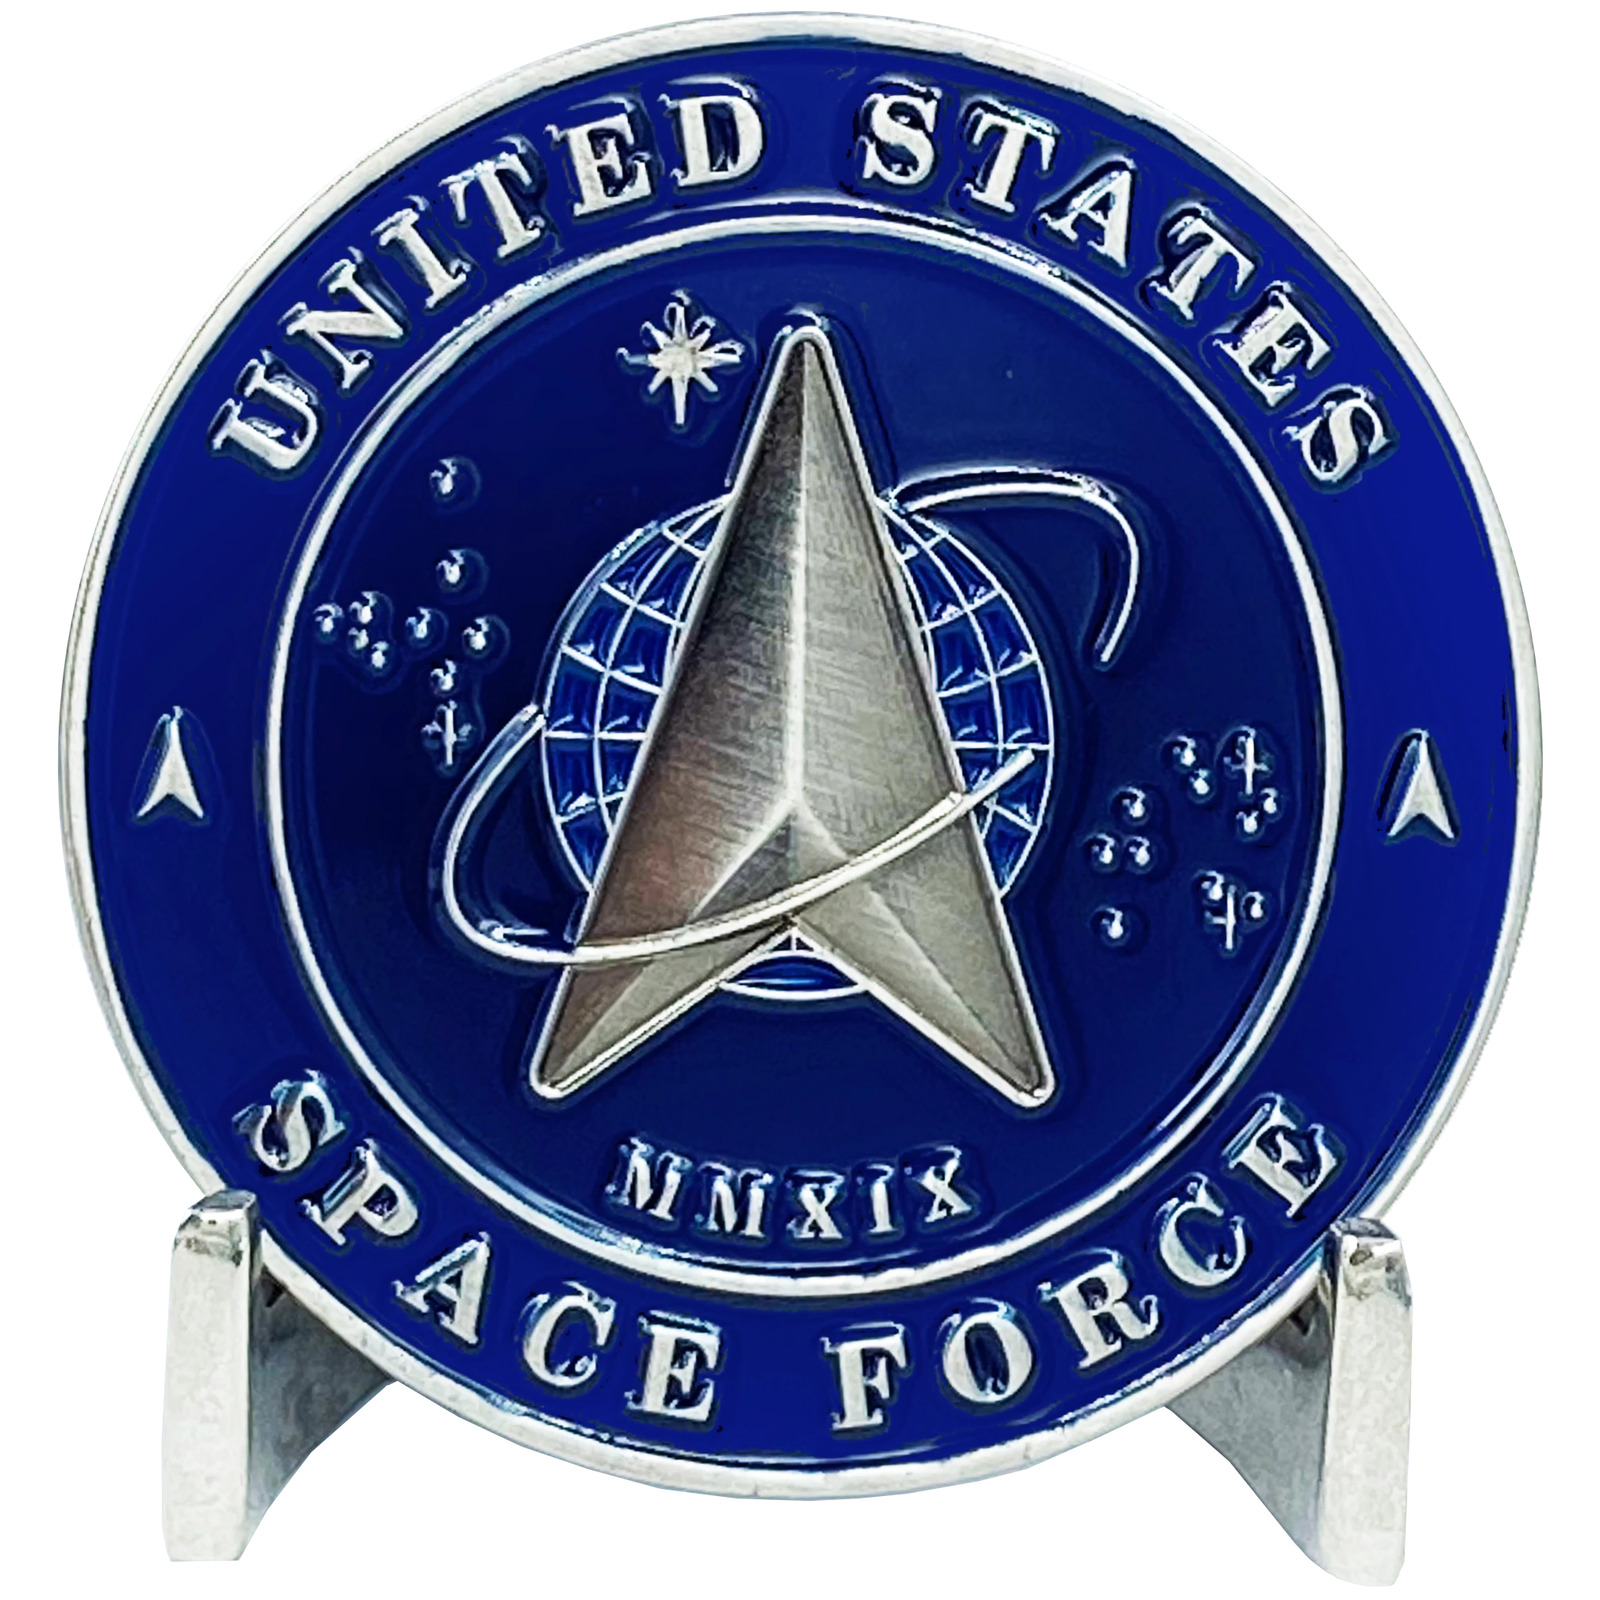 EL3-014 Space Force Challenge Coin United States Air Force USAF MMXIX US Space F